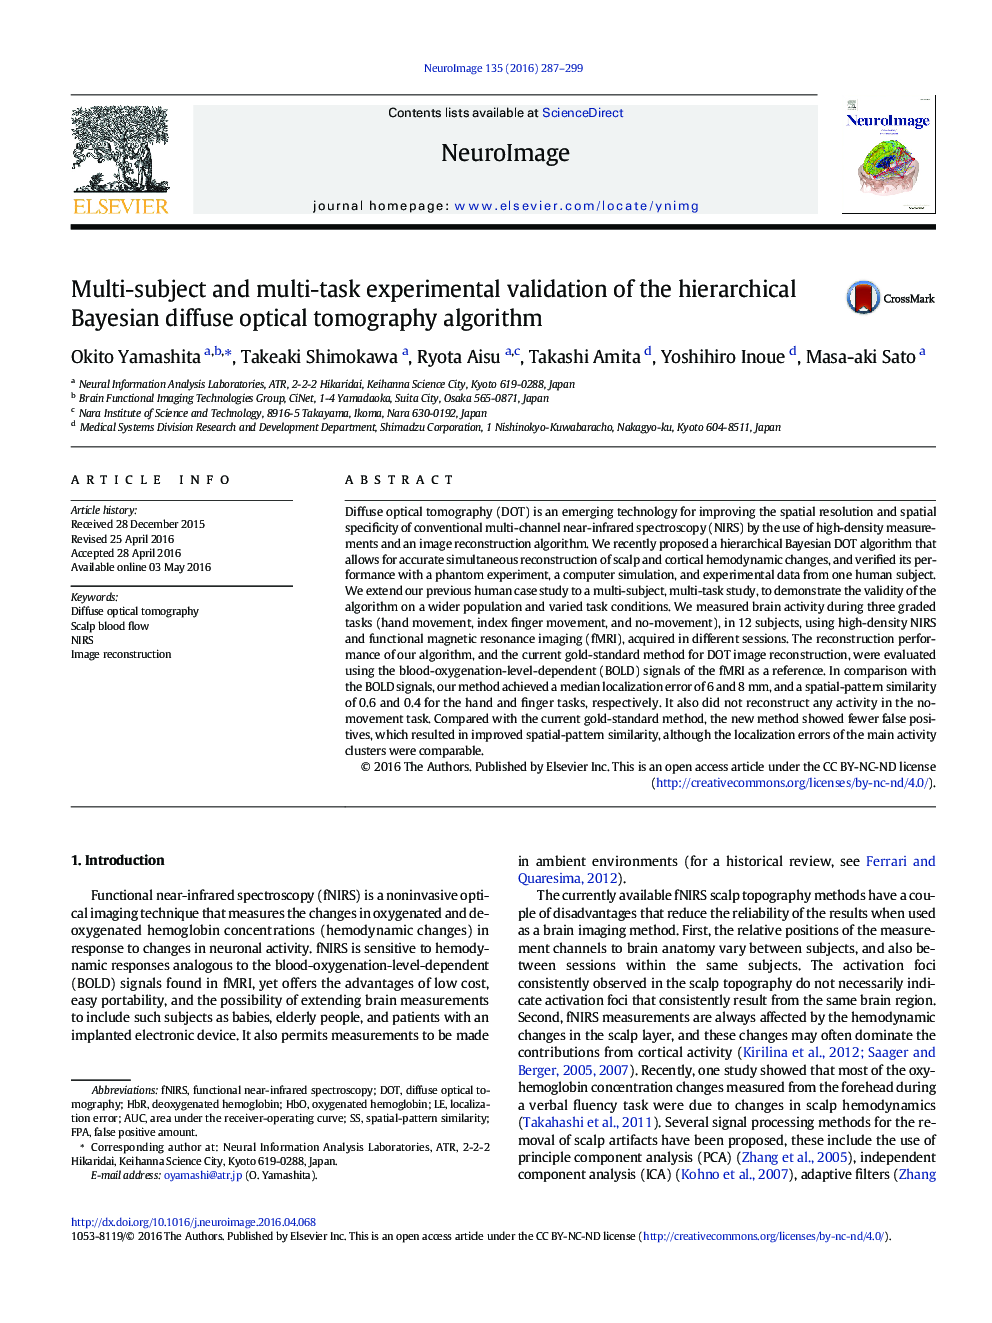 Multi-subject and multi-task experimental validation of the hierarchical Bayesian diffuse optical tomography algorithm